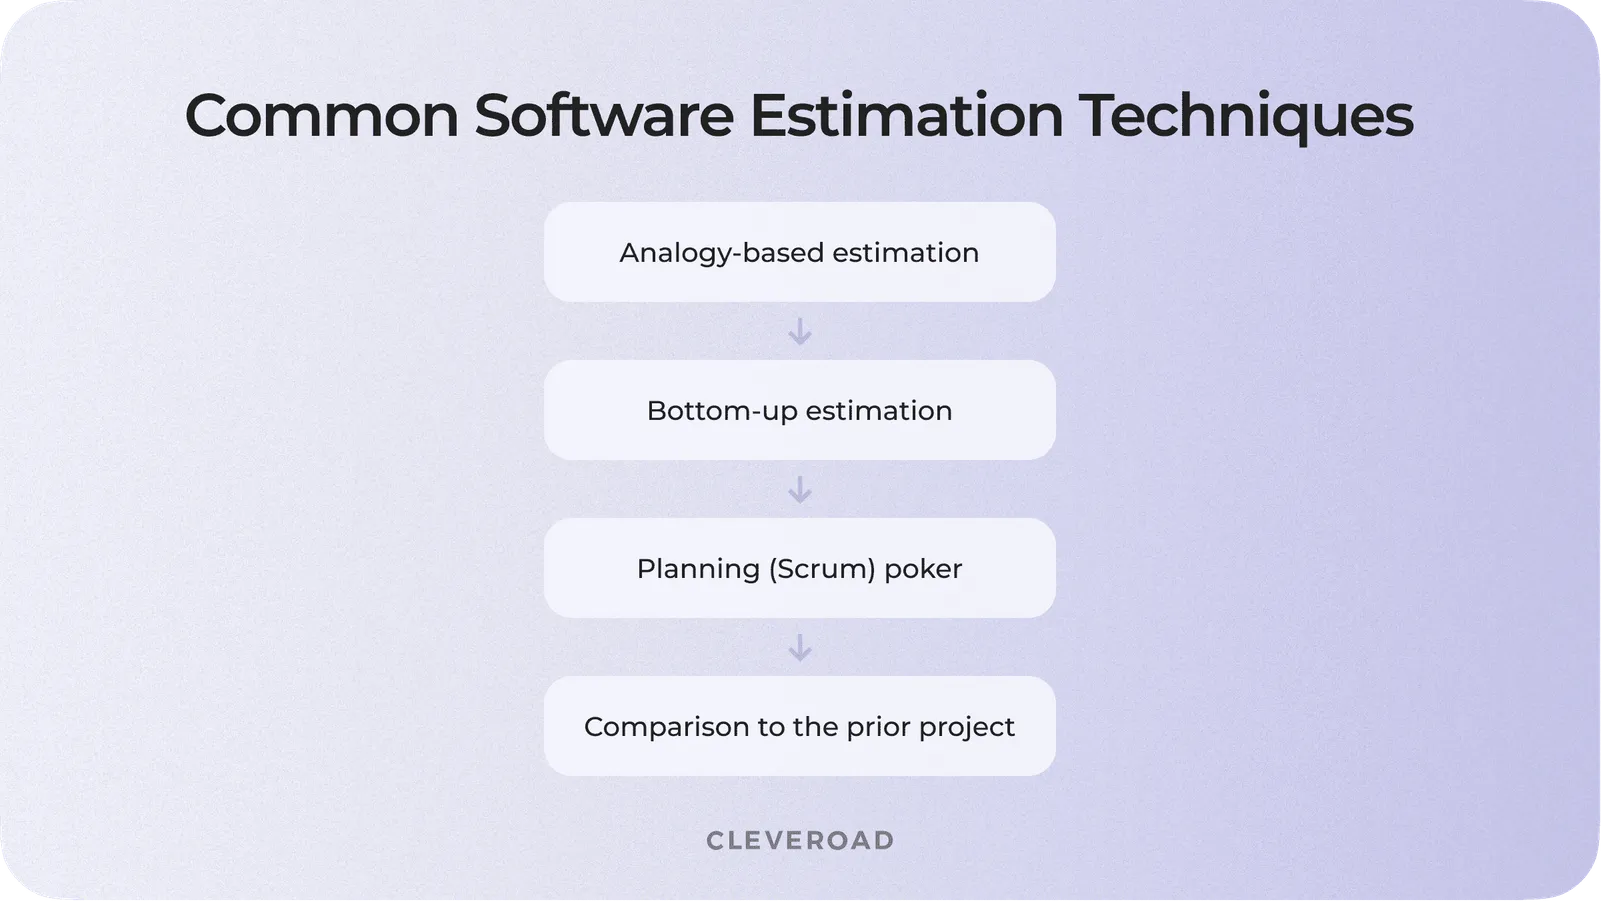 The techniques for estimation software engineering activities